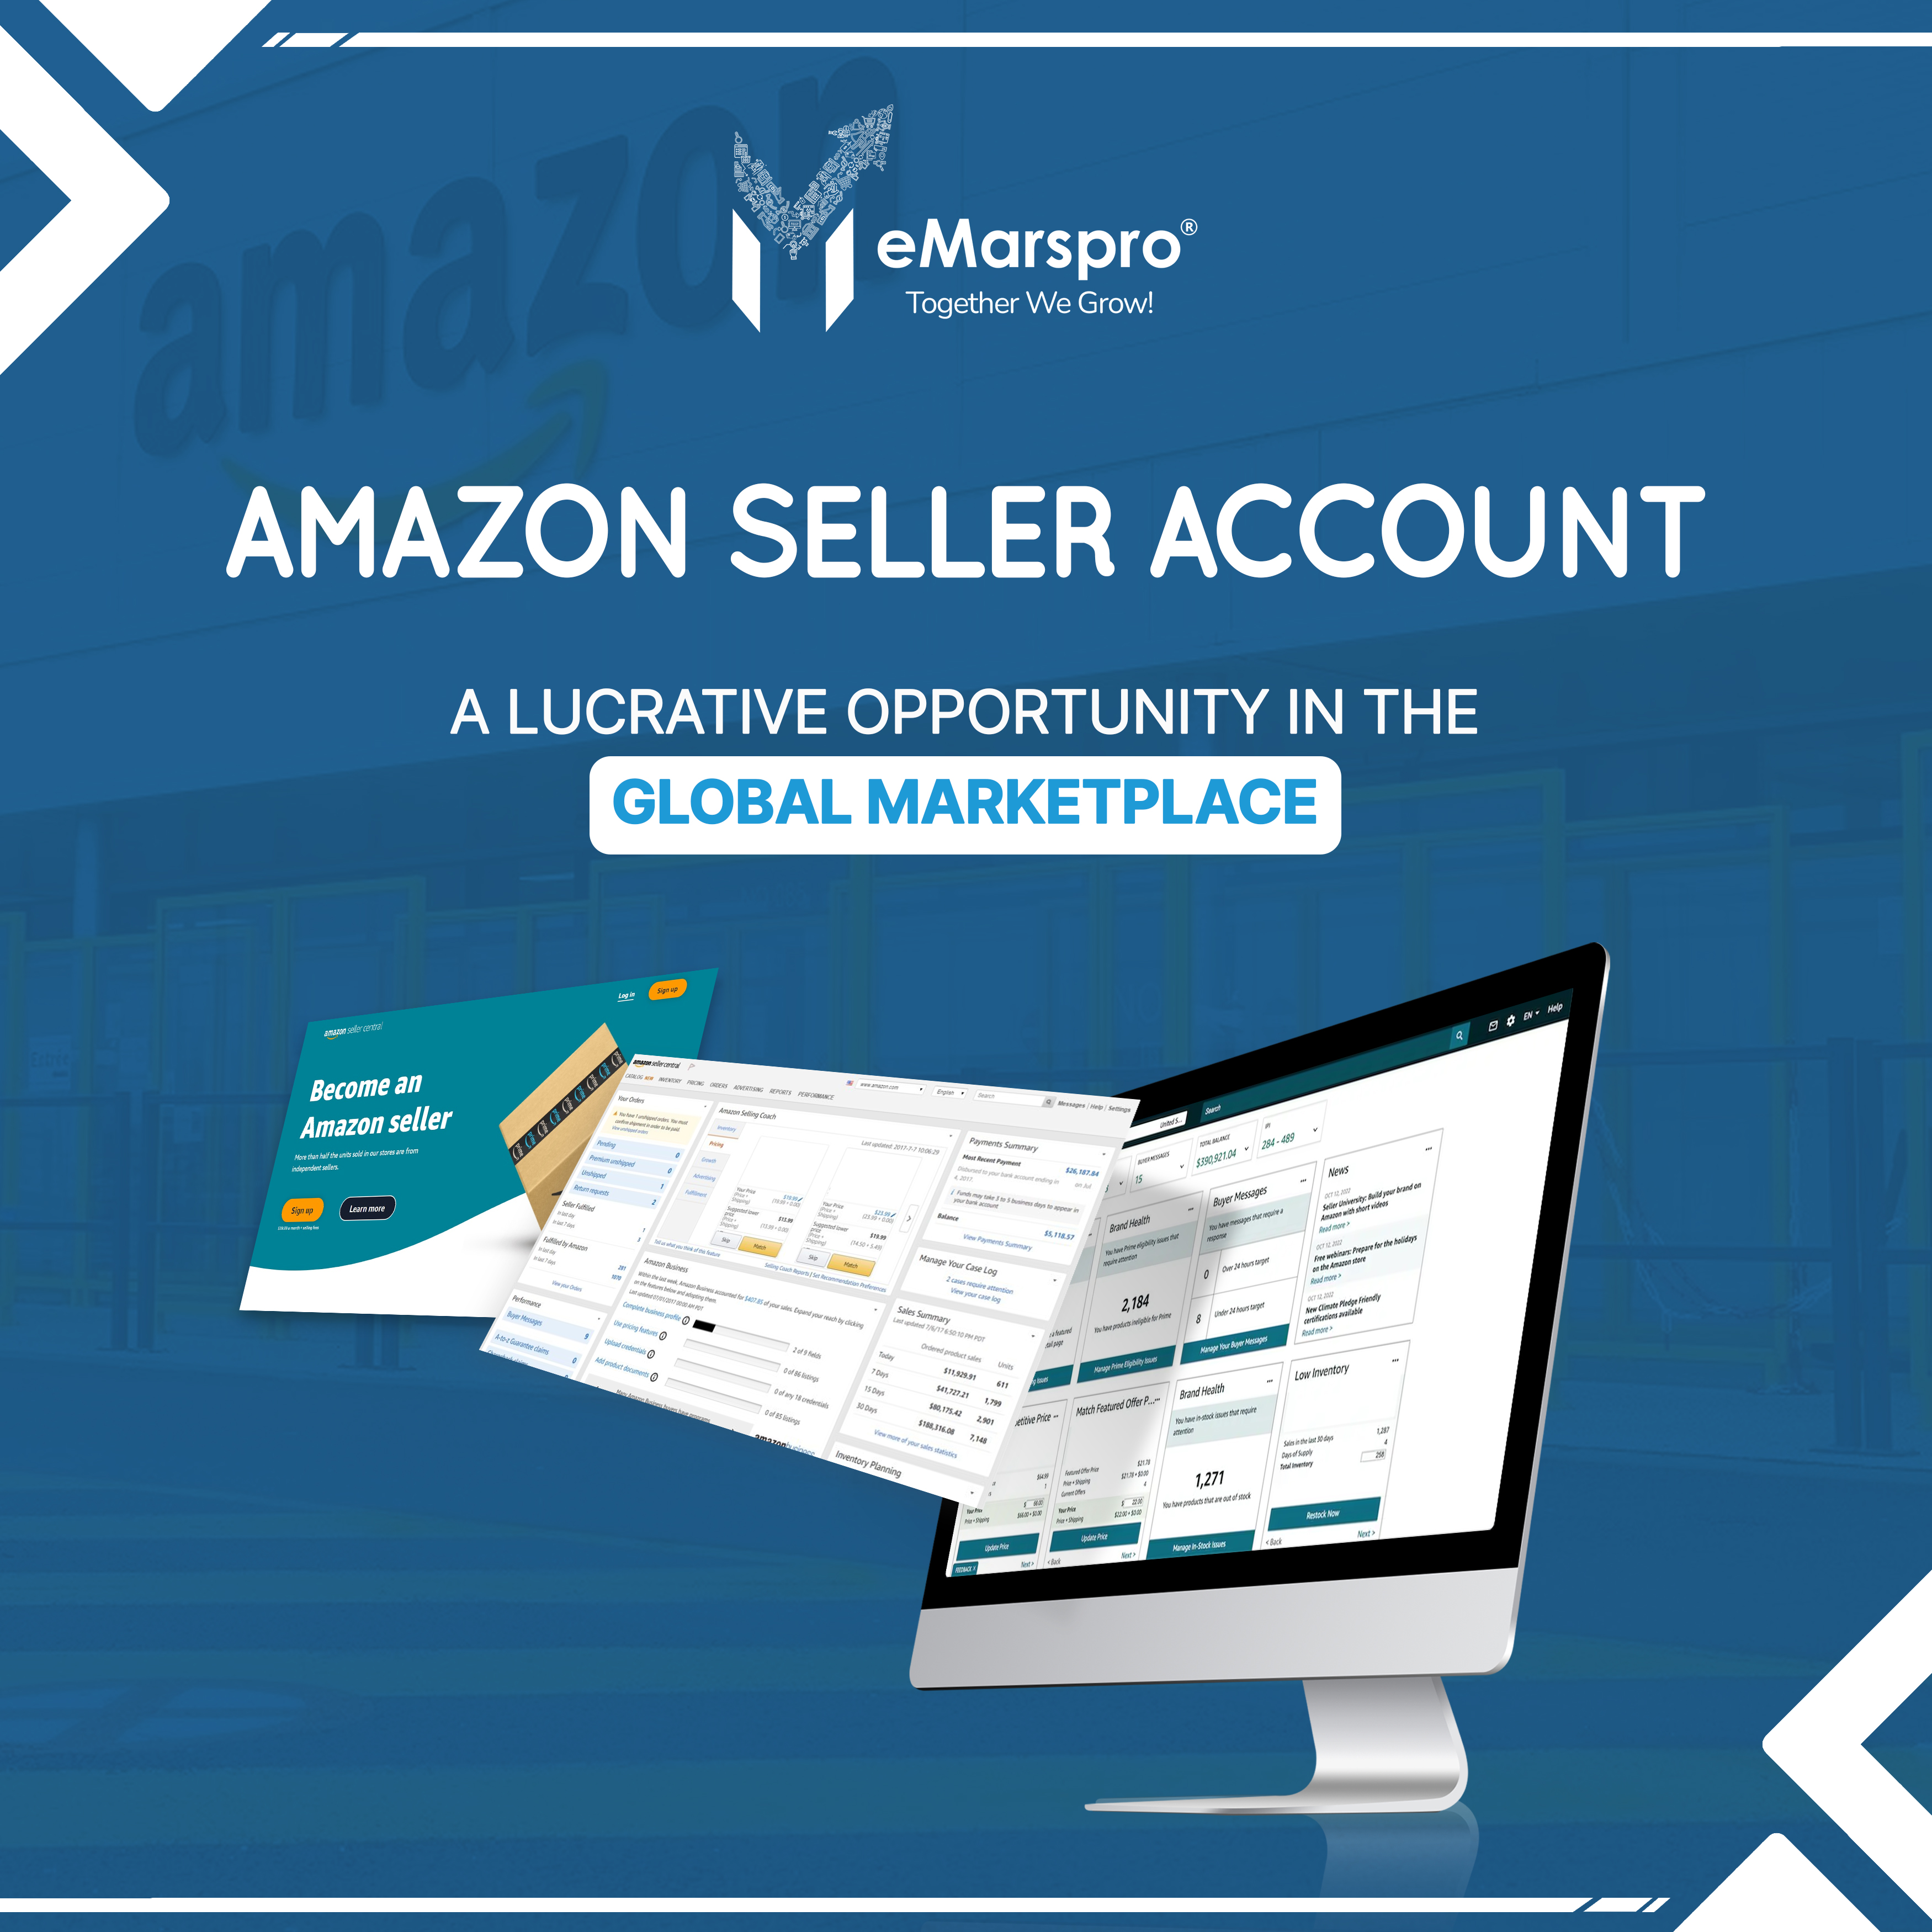 How to manage Amazon Seller Account